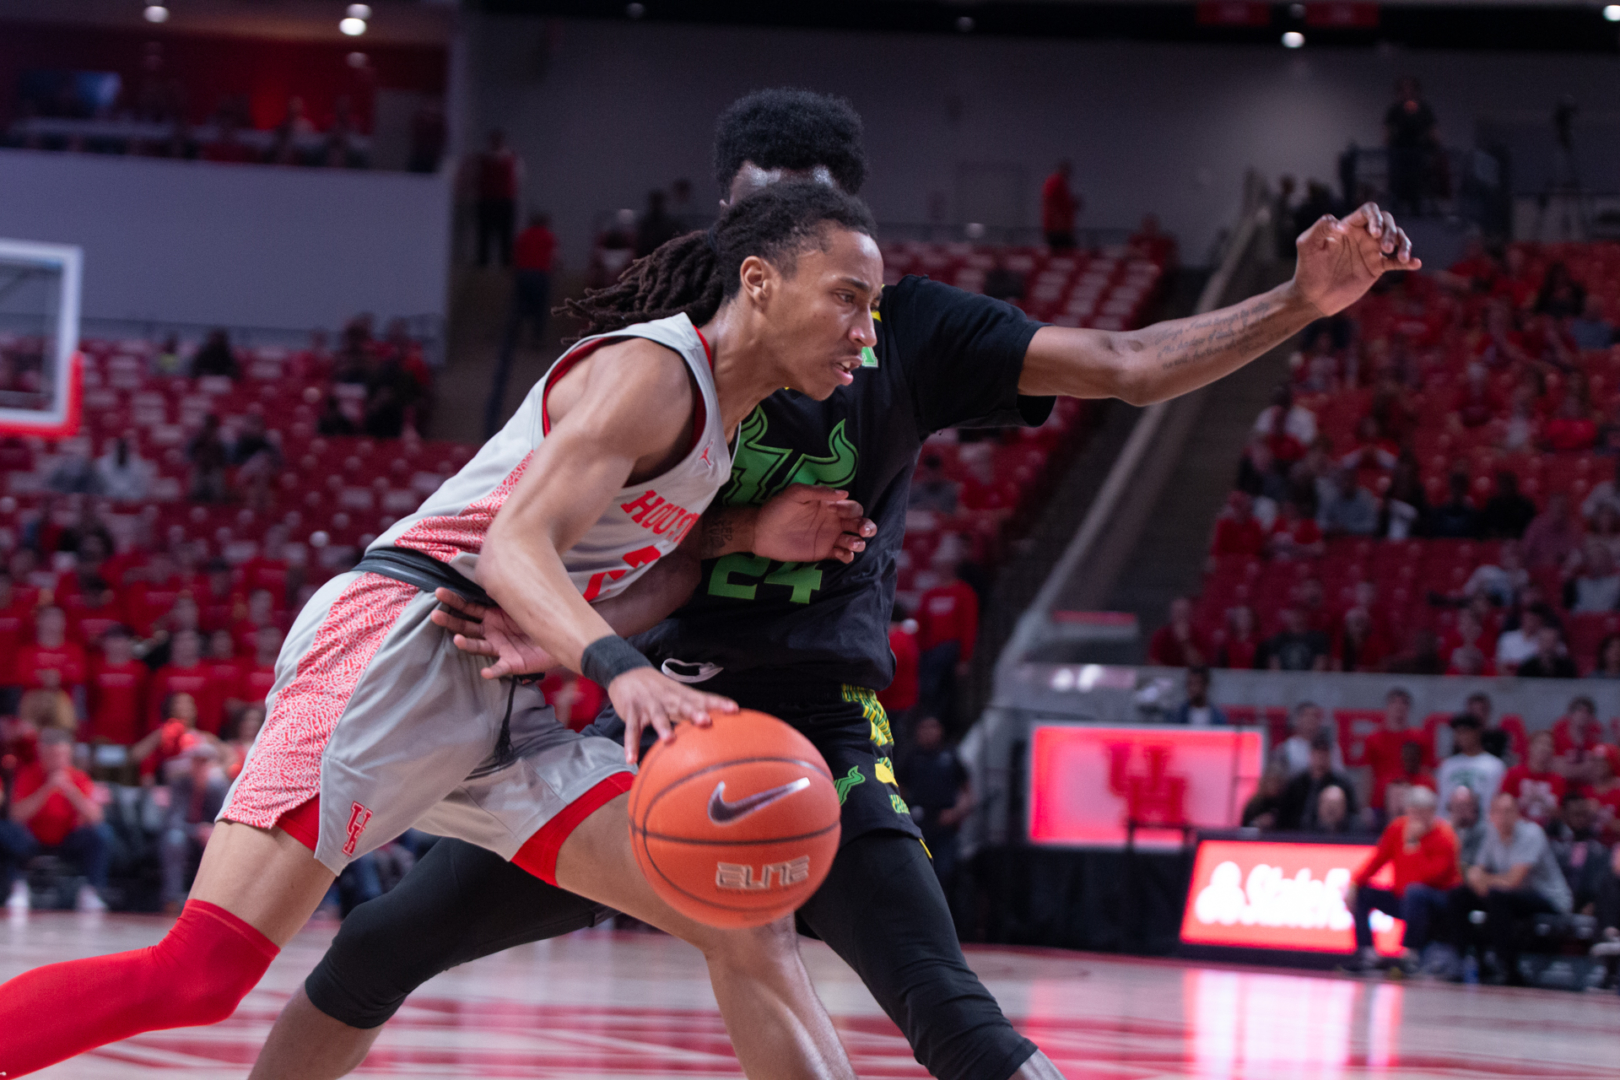 Redshirt freshman Caleb Mills enters the game against Cincinnati as the scoring leader for Houston, averaging 13.1 points per contest. | Kathyrn Lenihan/The Cougar